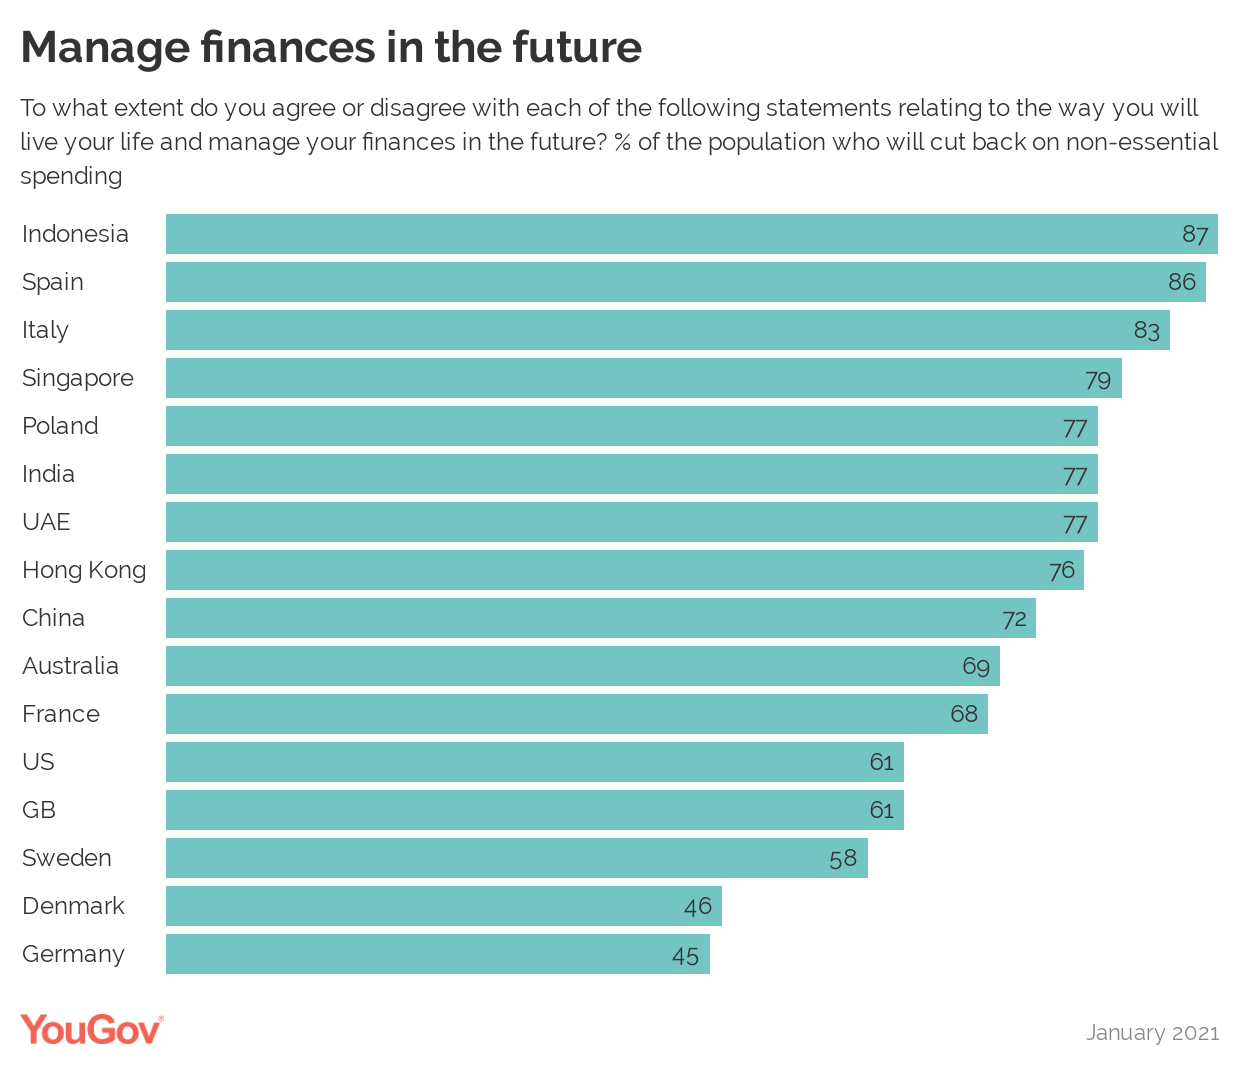 Manage finances in the future